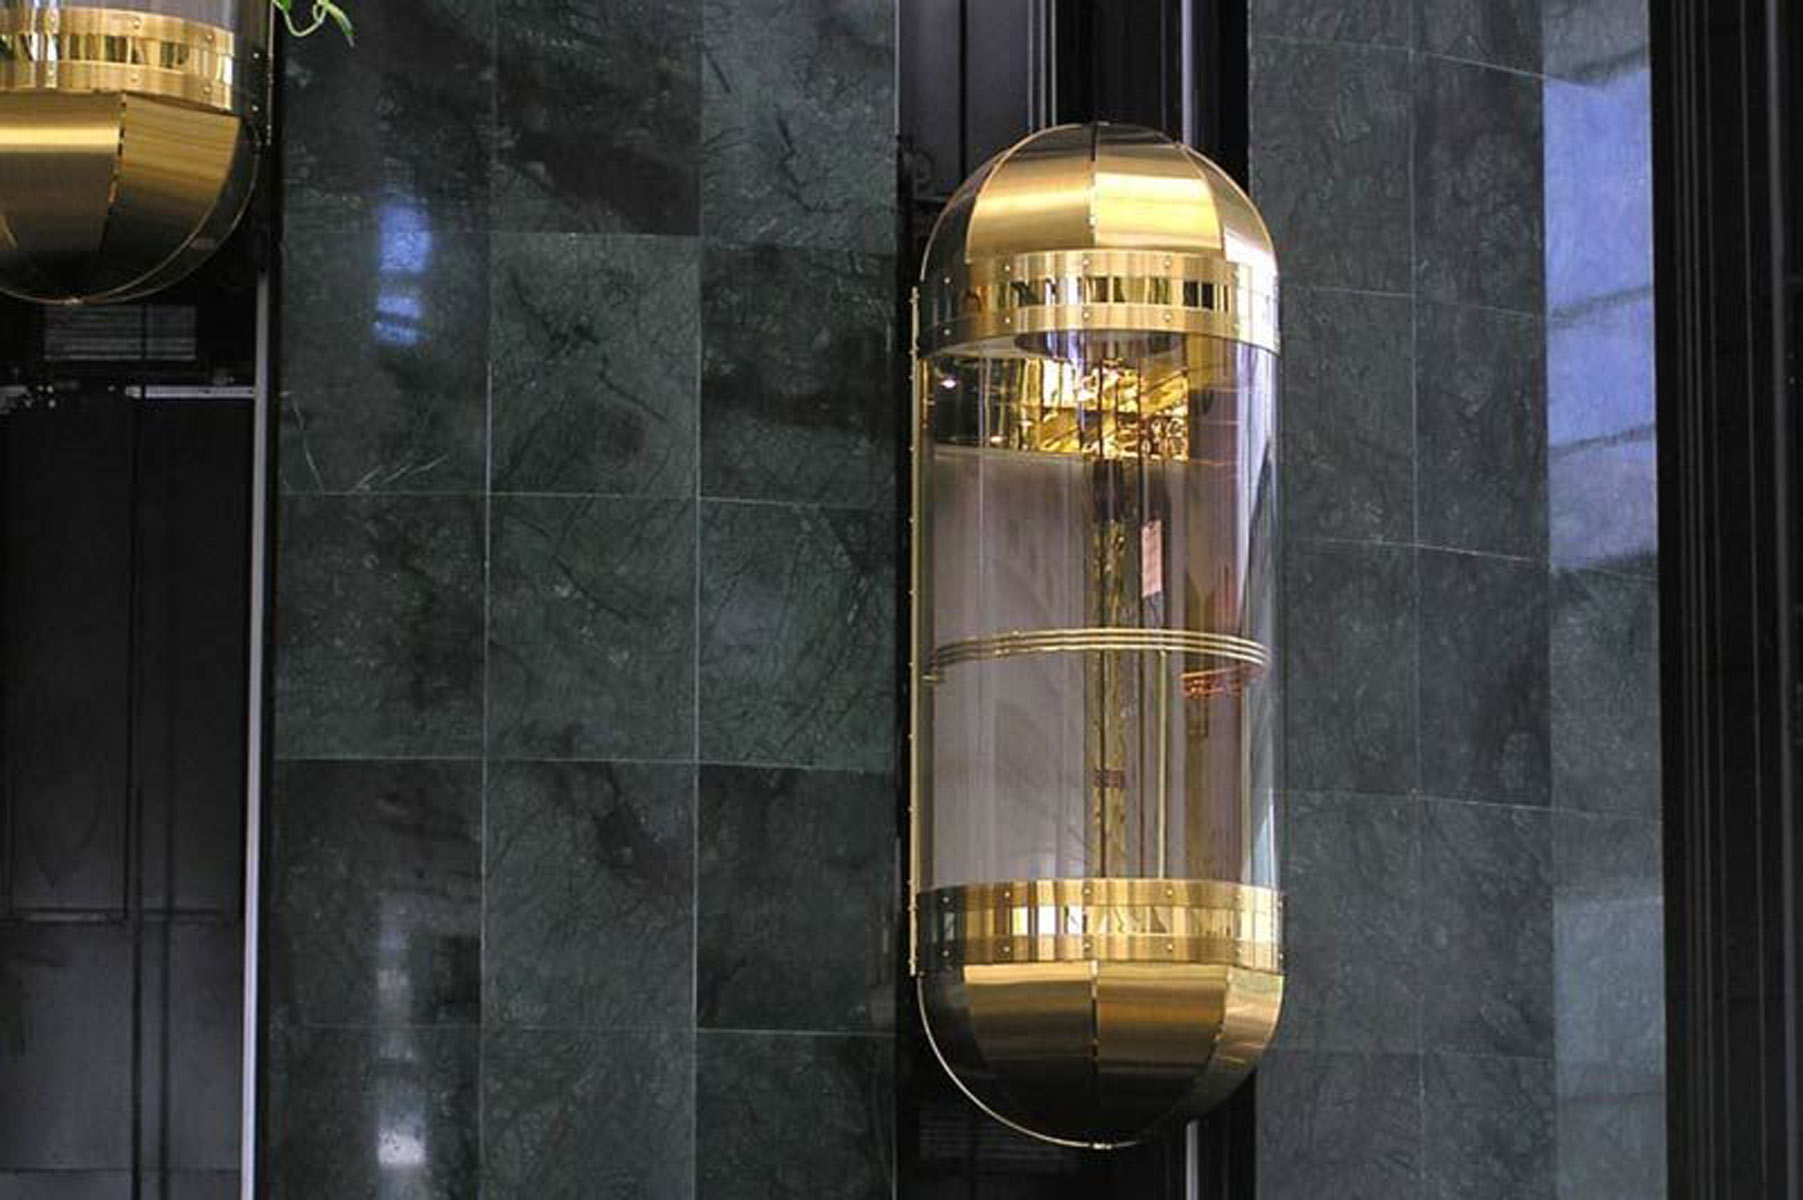 The company holds a license to practice the profession of elevators and membership